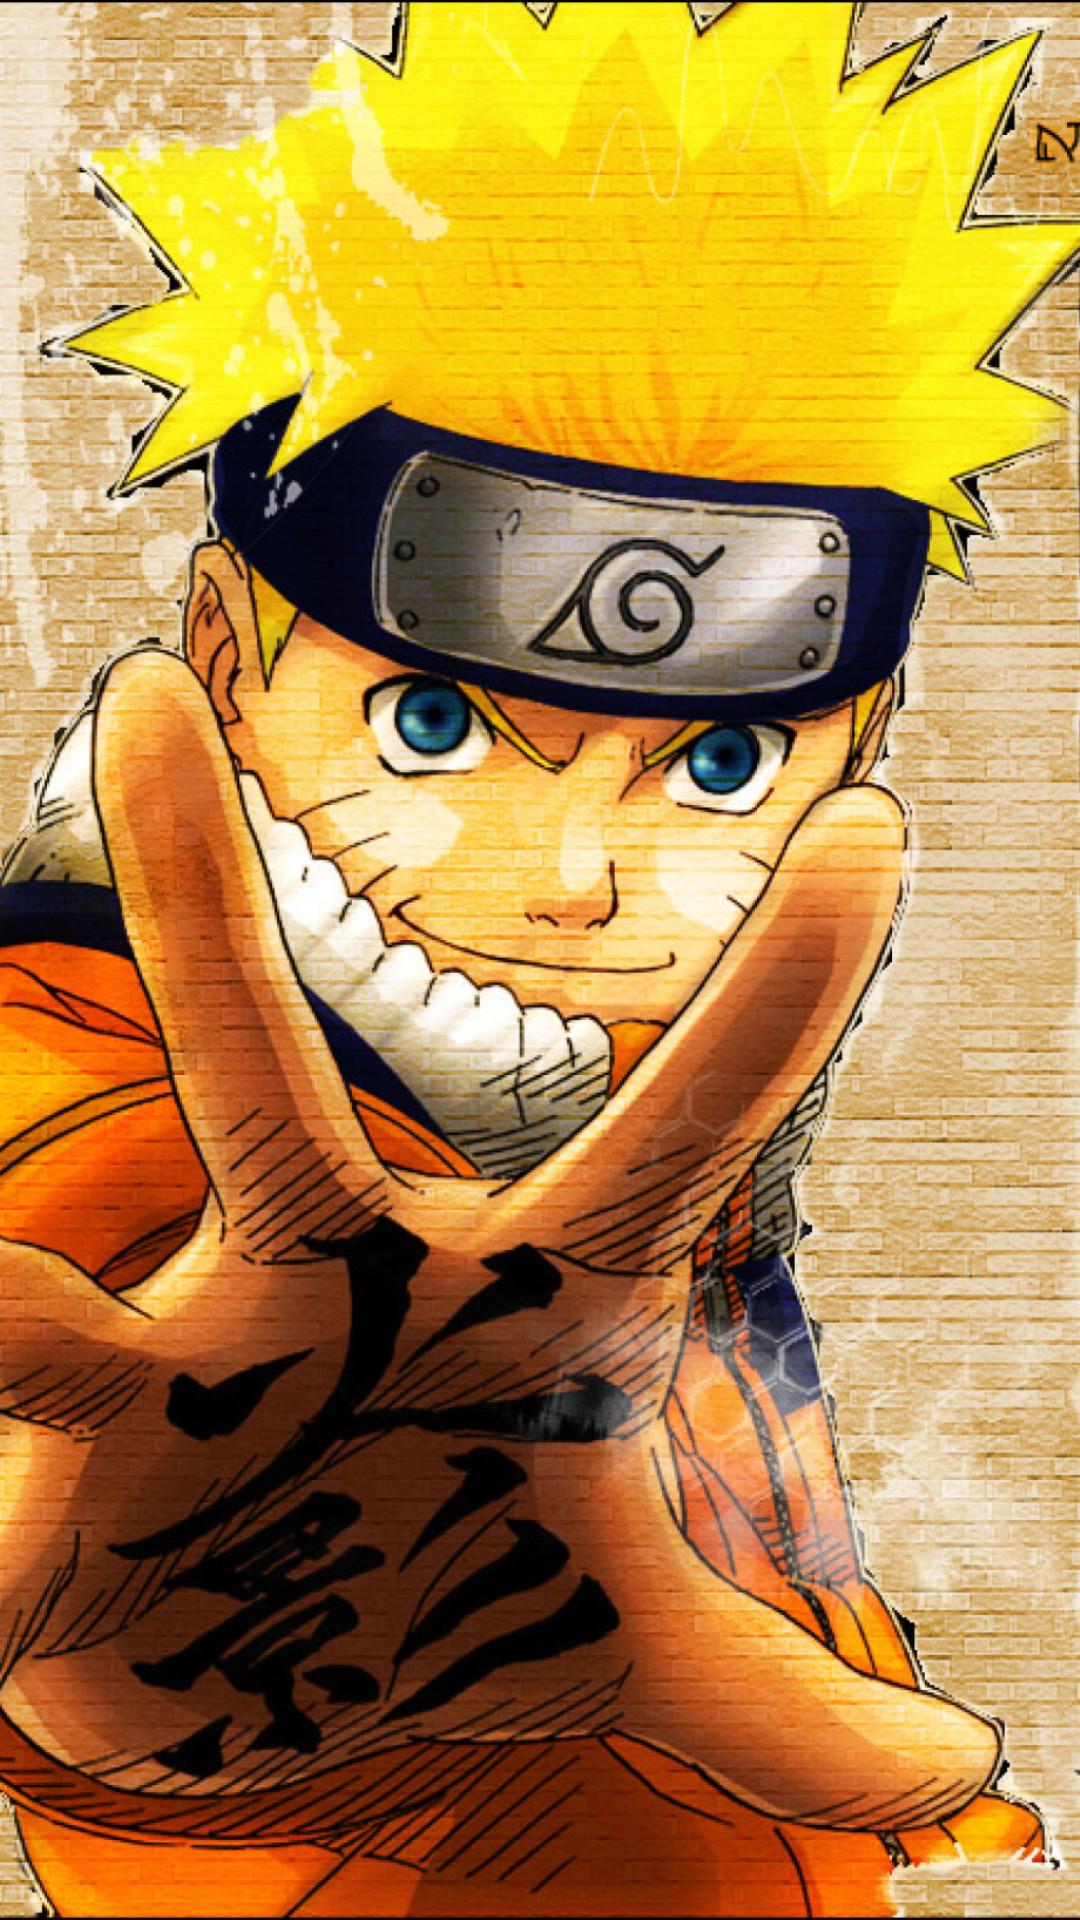 Naruto Wallpapers - Top 75 Best Naruto Backgrounds Download  Naruto phone  wallpaper, Best naruto wallpapers, Naruto wallpaper iphone